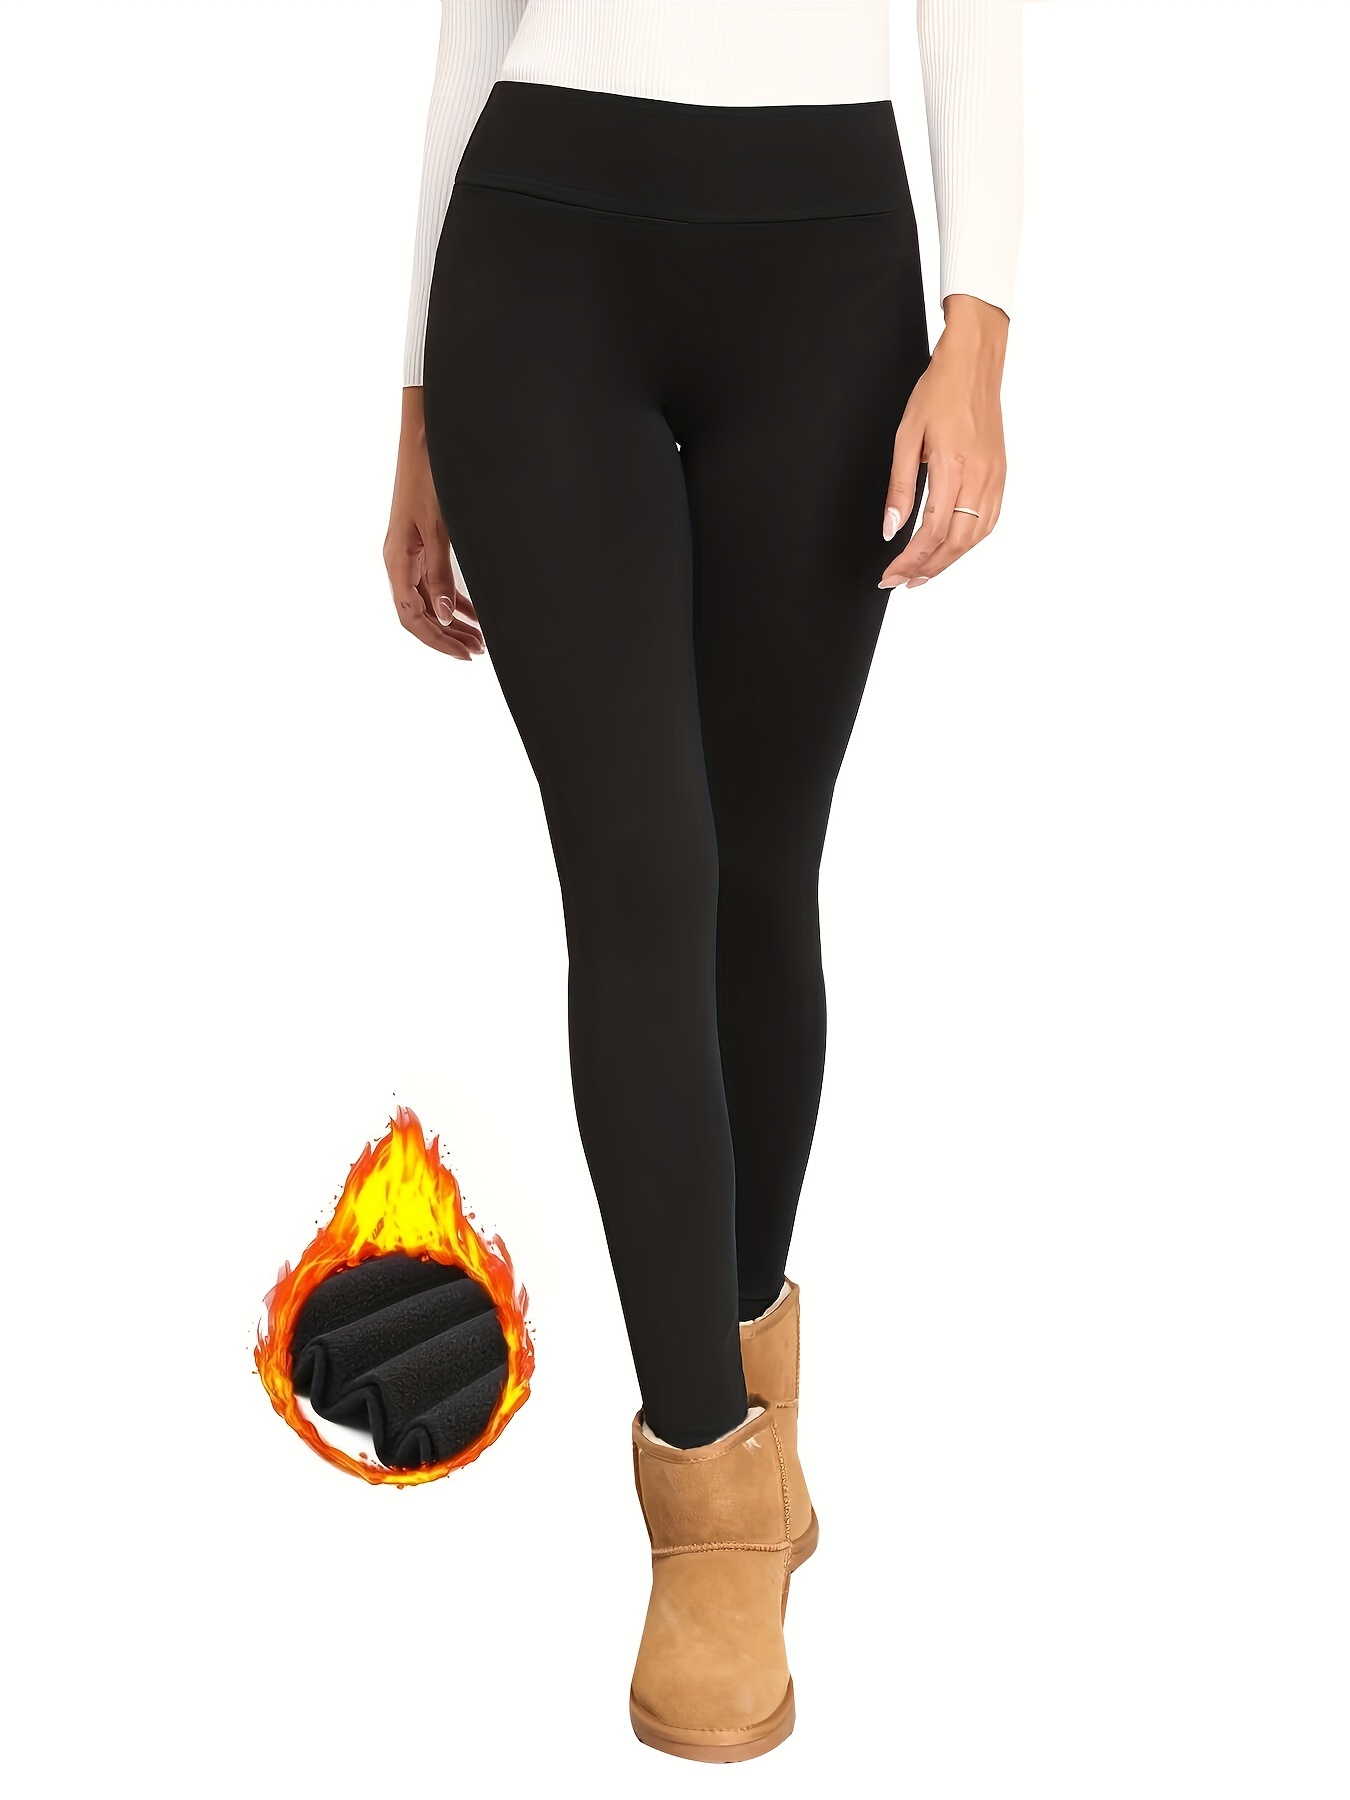 Solid High Waist Skinny Leggings, Casual Thermal Stretchy Leggings, Women's  Clothing